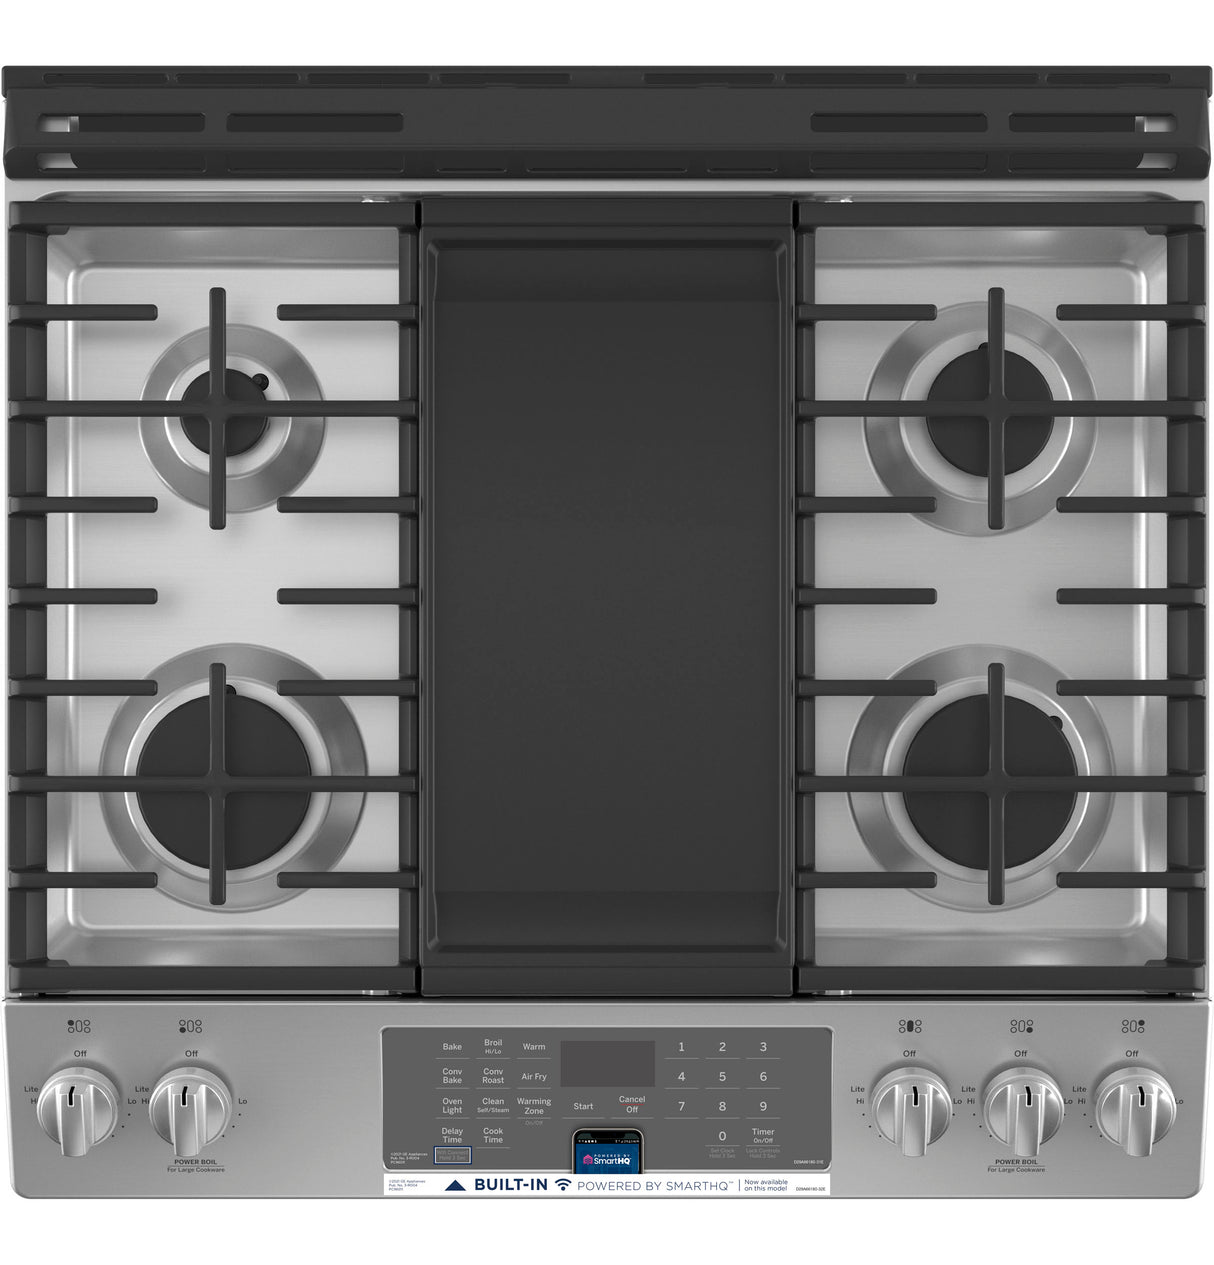 GE(R) 30" Slide-In Front-Control Convection Gas Range with No Preheat Air Fry - (JGS760SPSS)